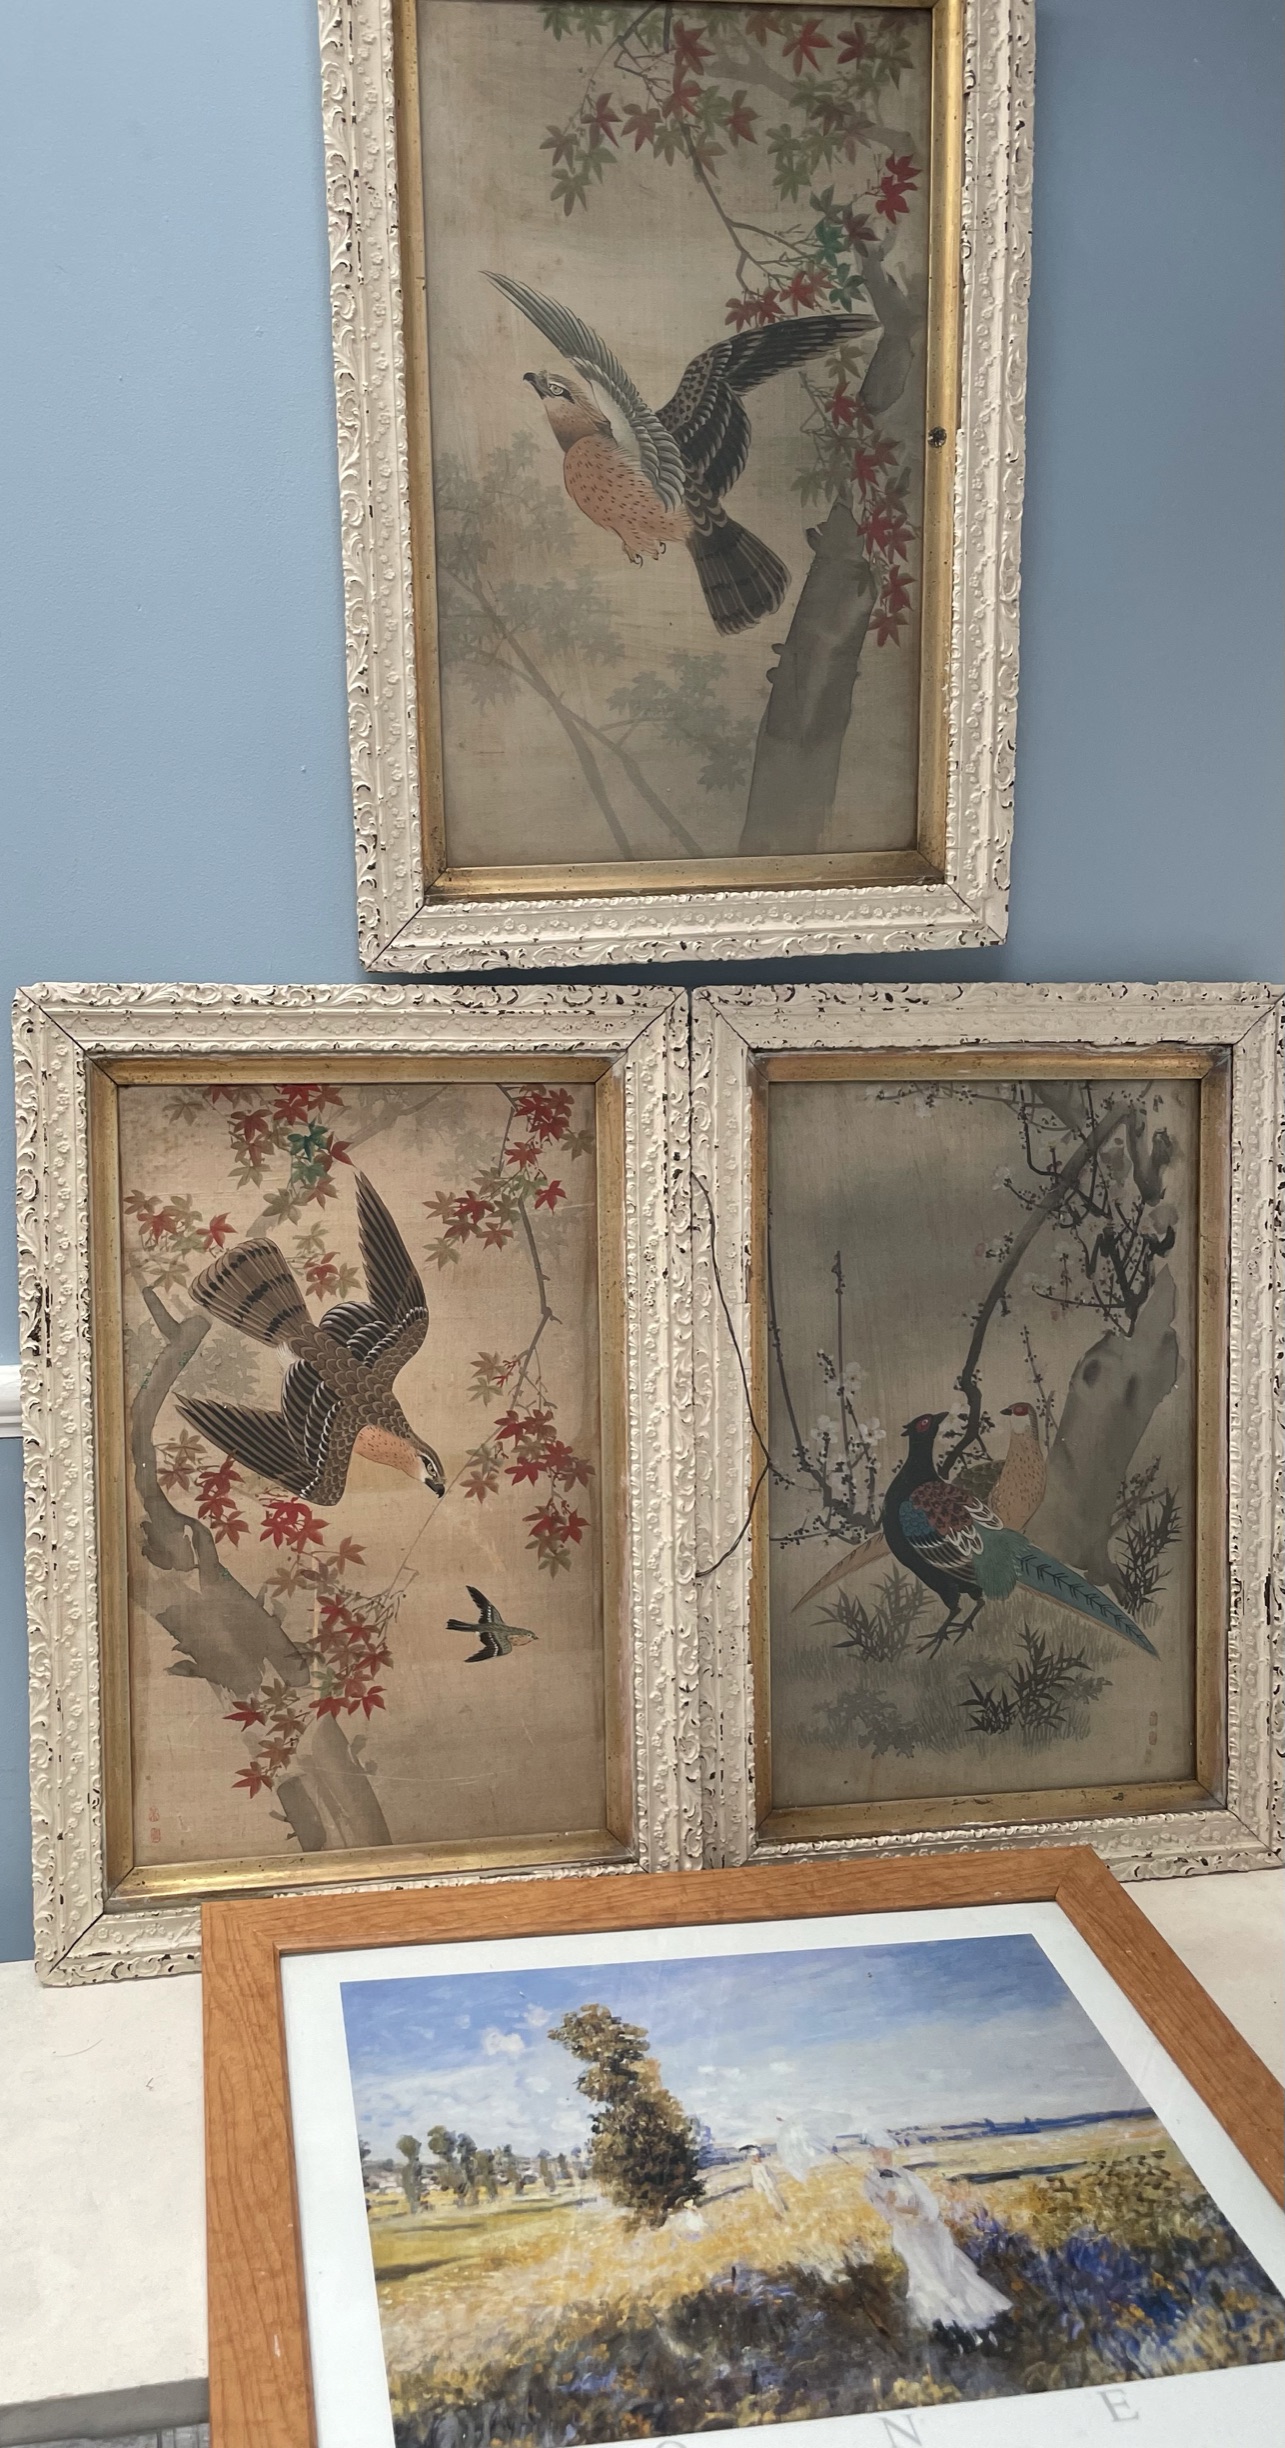 A set of three Japanese watercolours on silk depicting birds together with a print